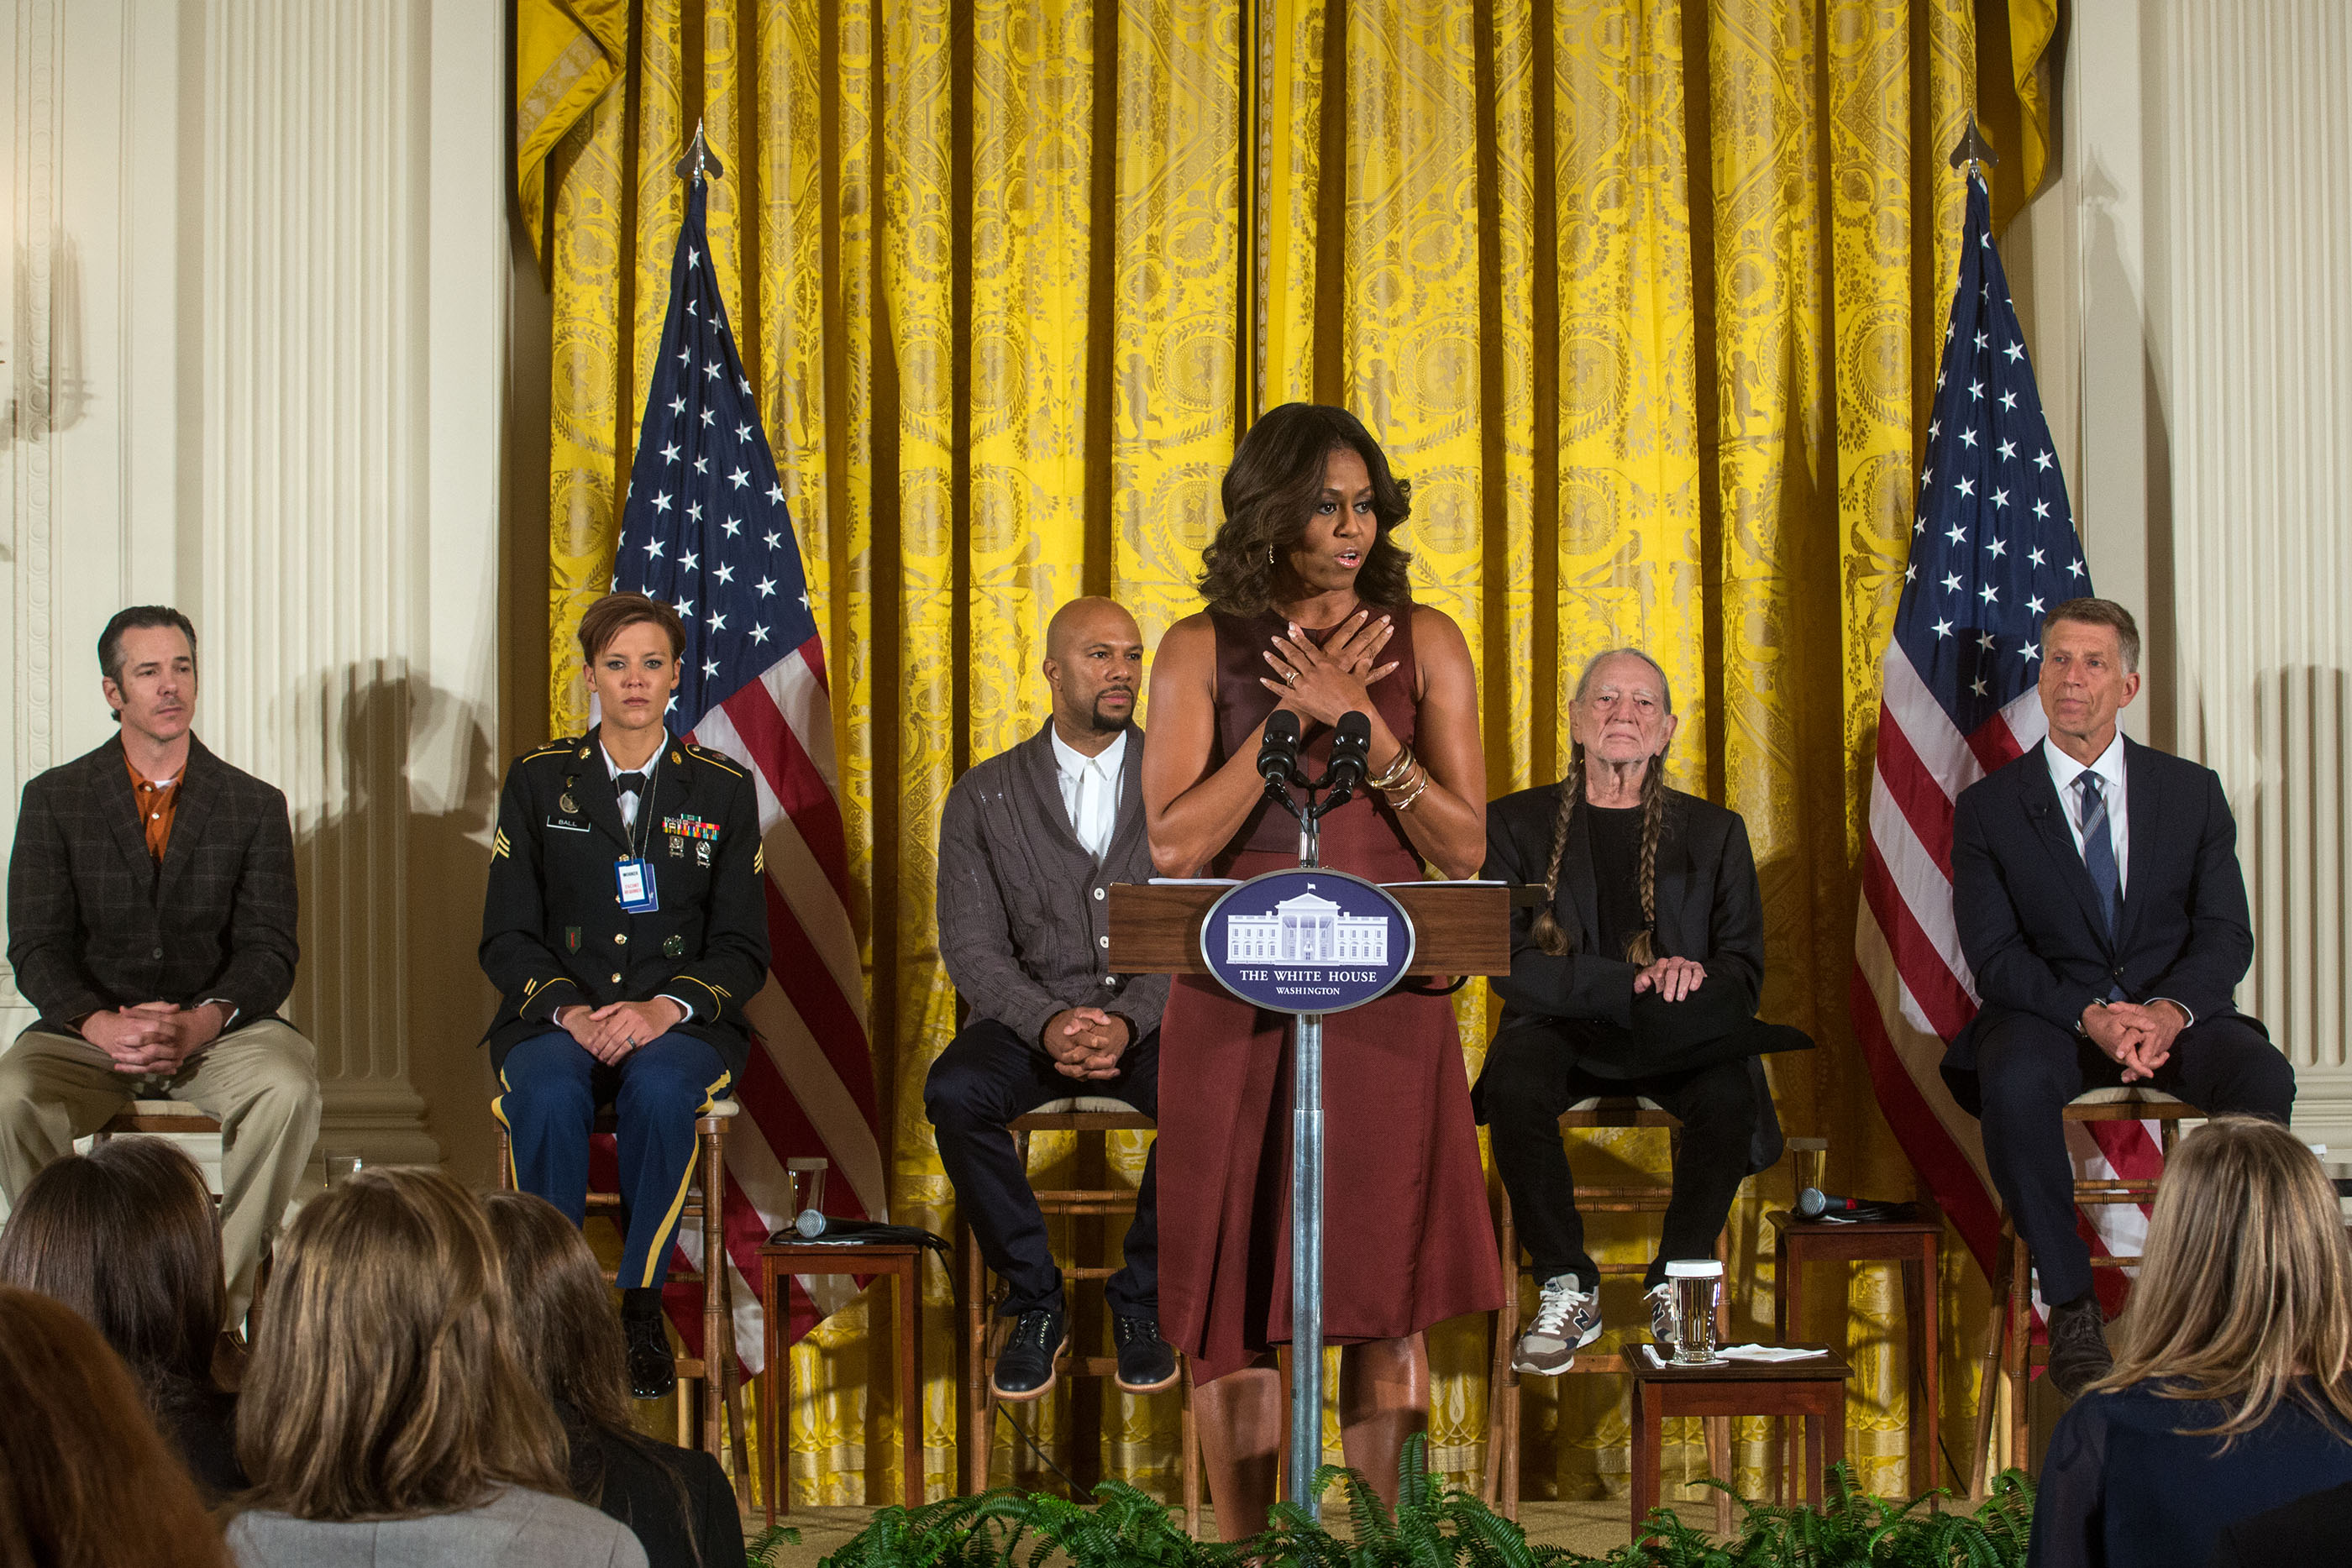 The First Lady delivers remarks at a workshop for high school students from military communities, in the East Room of the White House, Nov. 6, 2016.  (Official White House Photo by Chuck Kennedy)